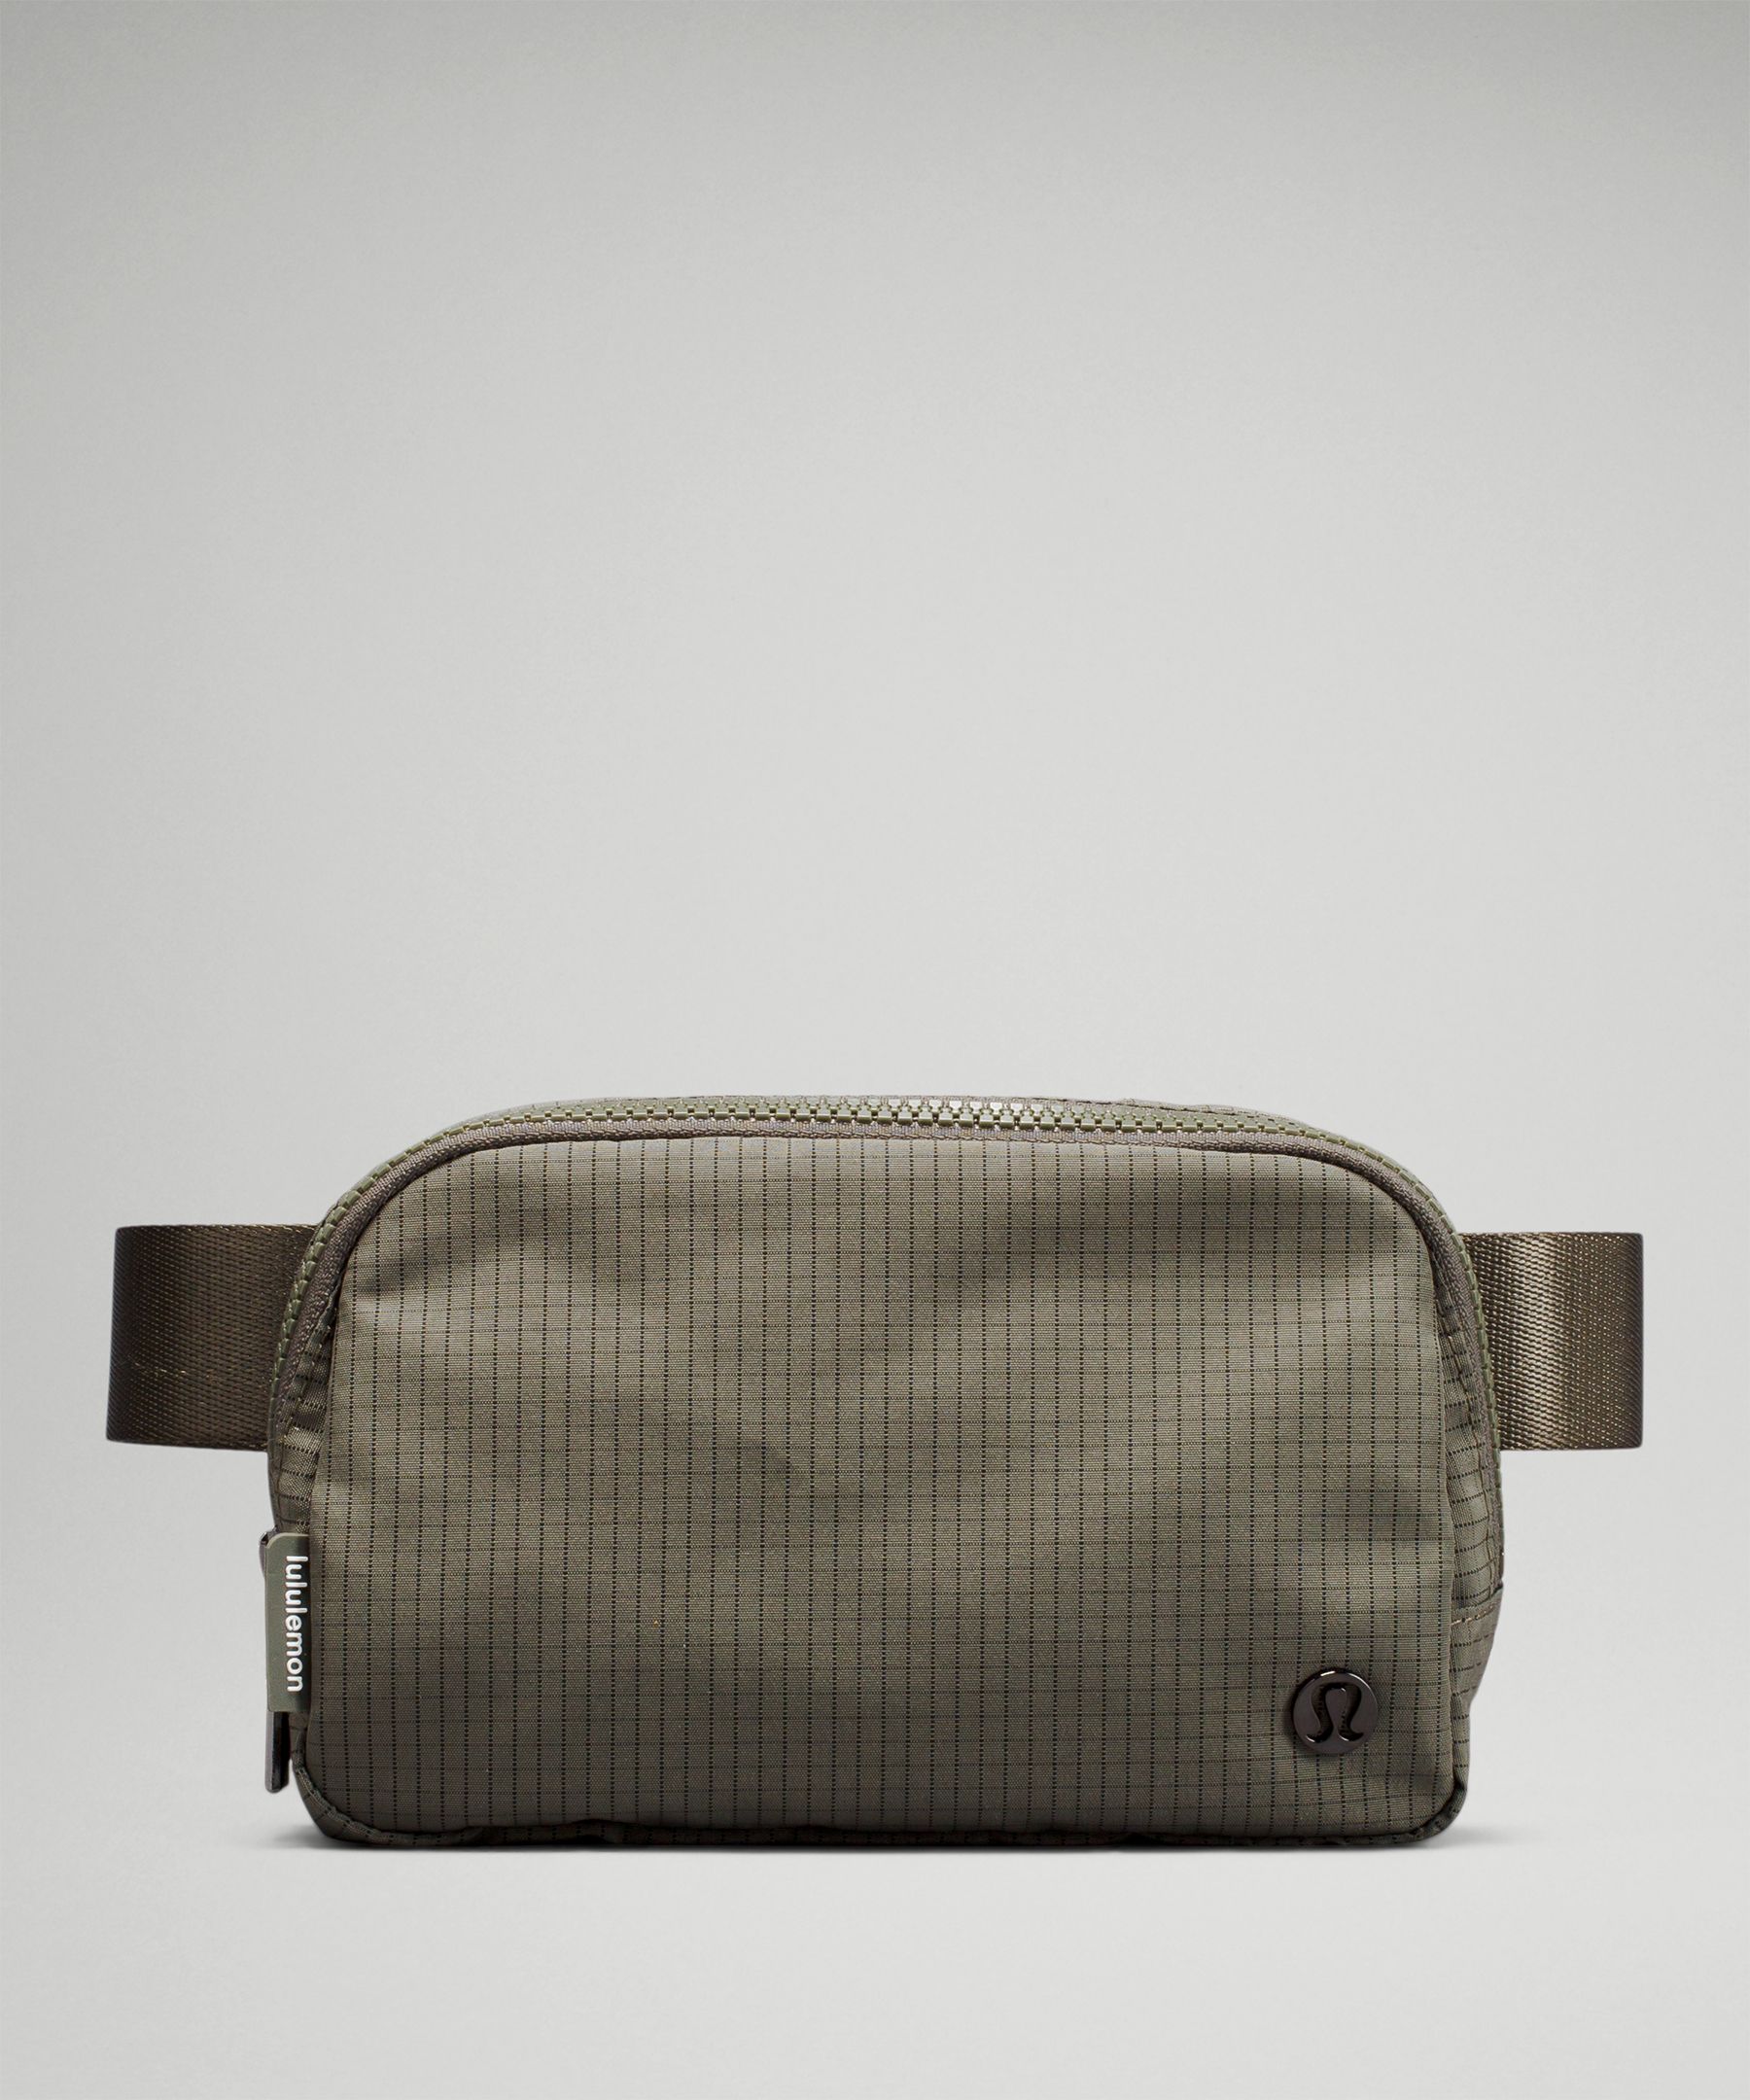 HTF lululemon Pack and go backpack with Fanny pack